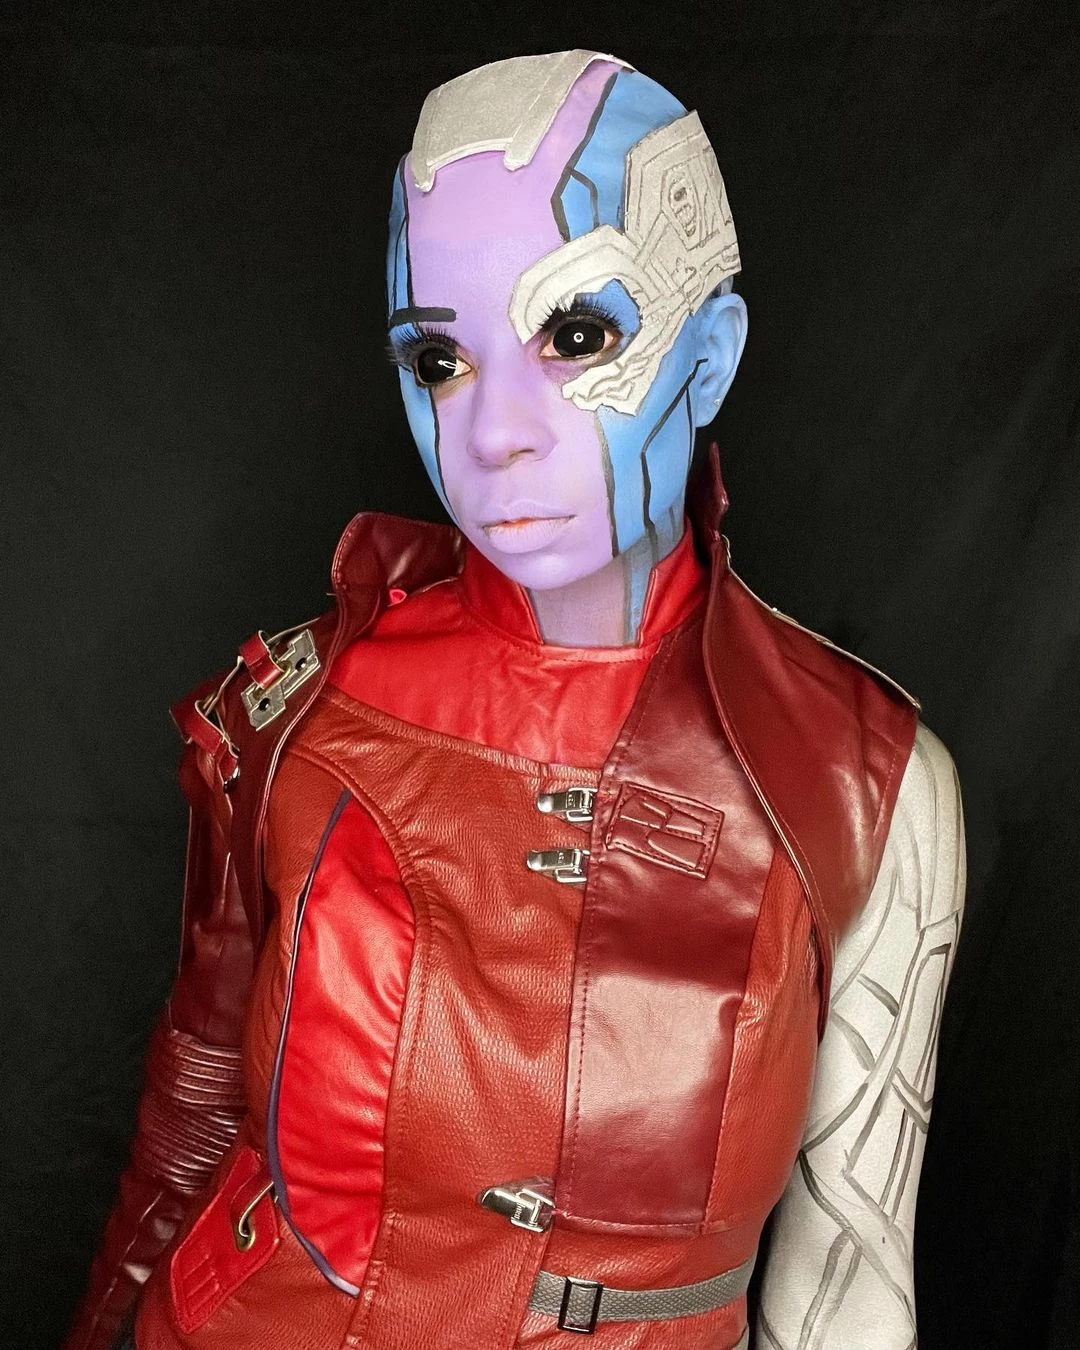 Imagine The Effort She Has Put In This Nebula Makeup